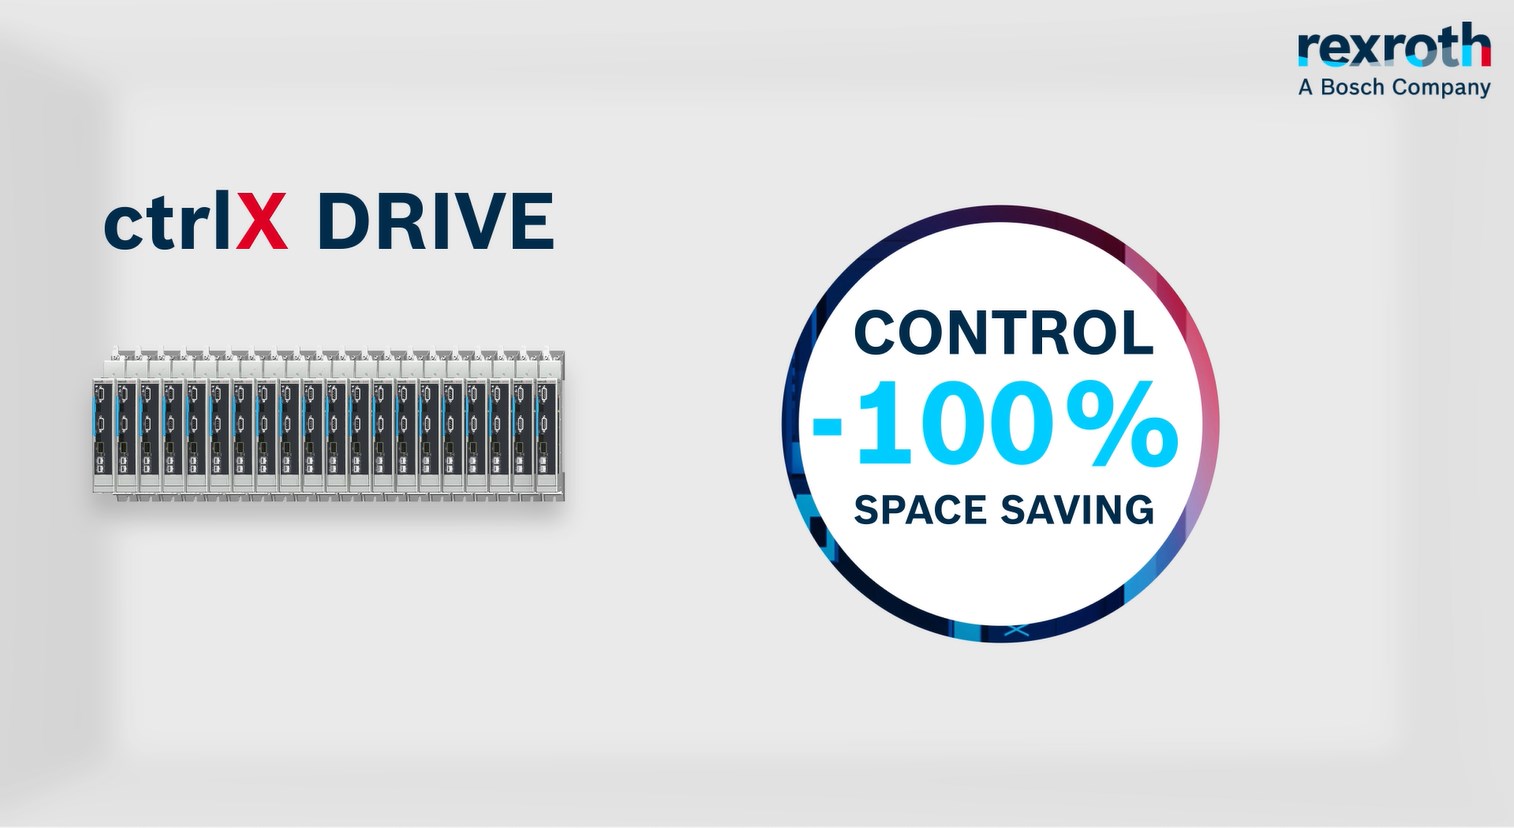 ctrlX DRIVE - the most compact drive system worldwide - ctrlX